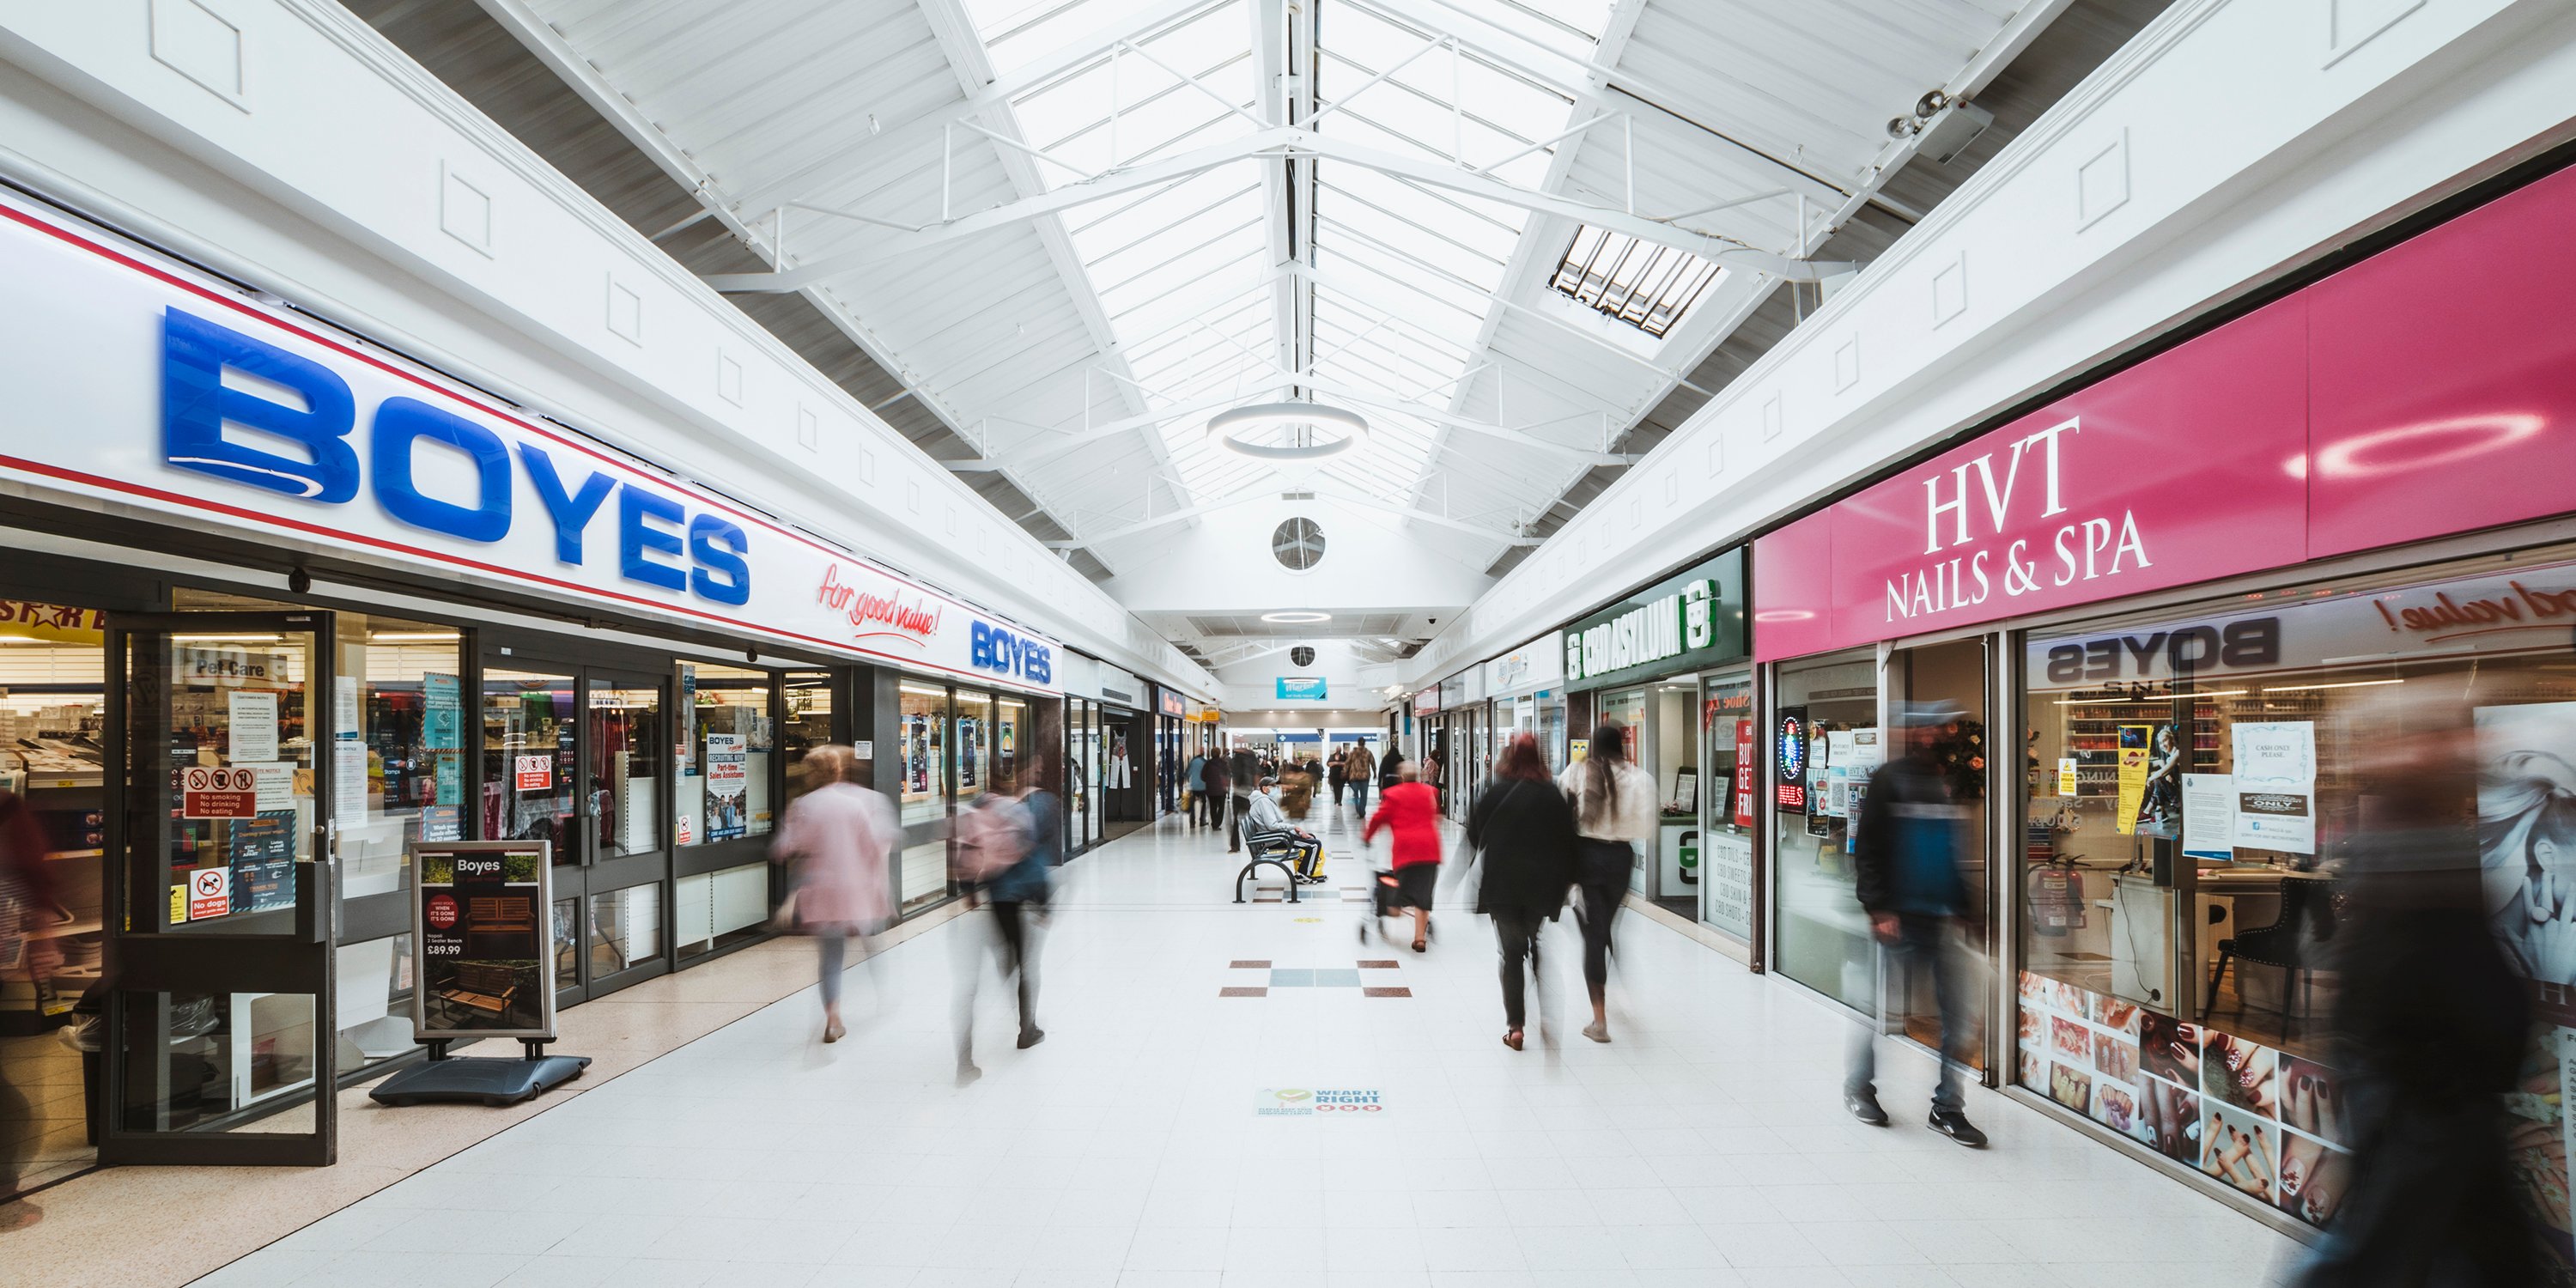 Interior of North Point Shopping Centre with Boyes on the left and HVT Nails & Spa on the right  with blurred shoppers in the middle